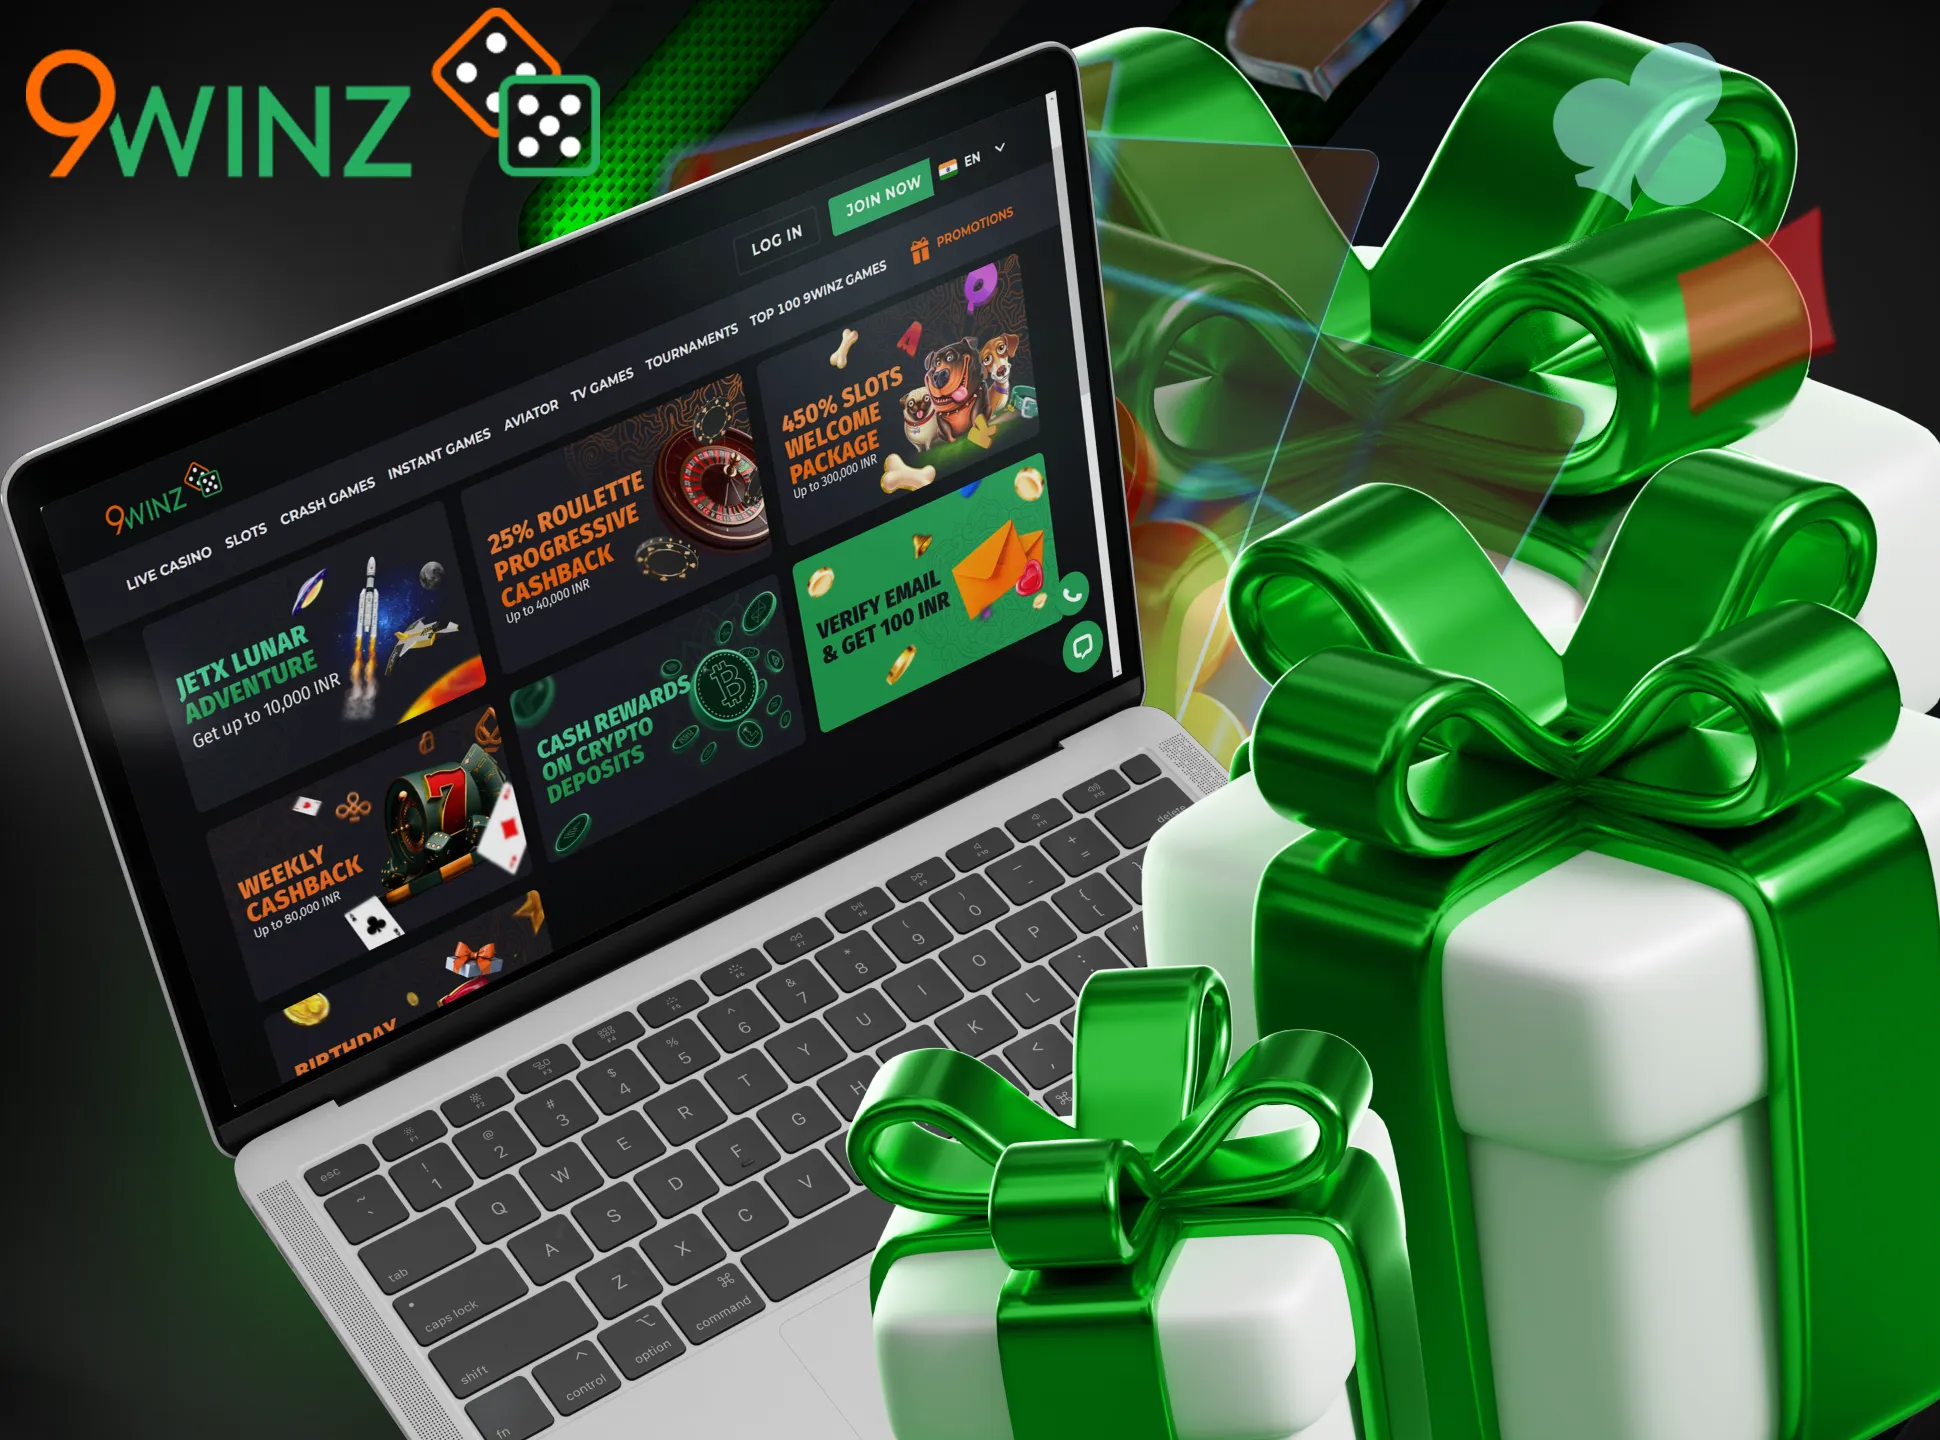 You can receive 450% bonus from 9winz on the casino games.